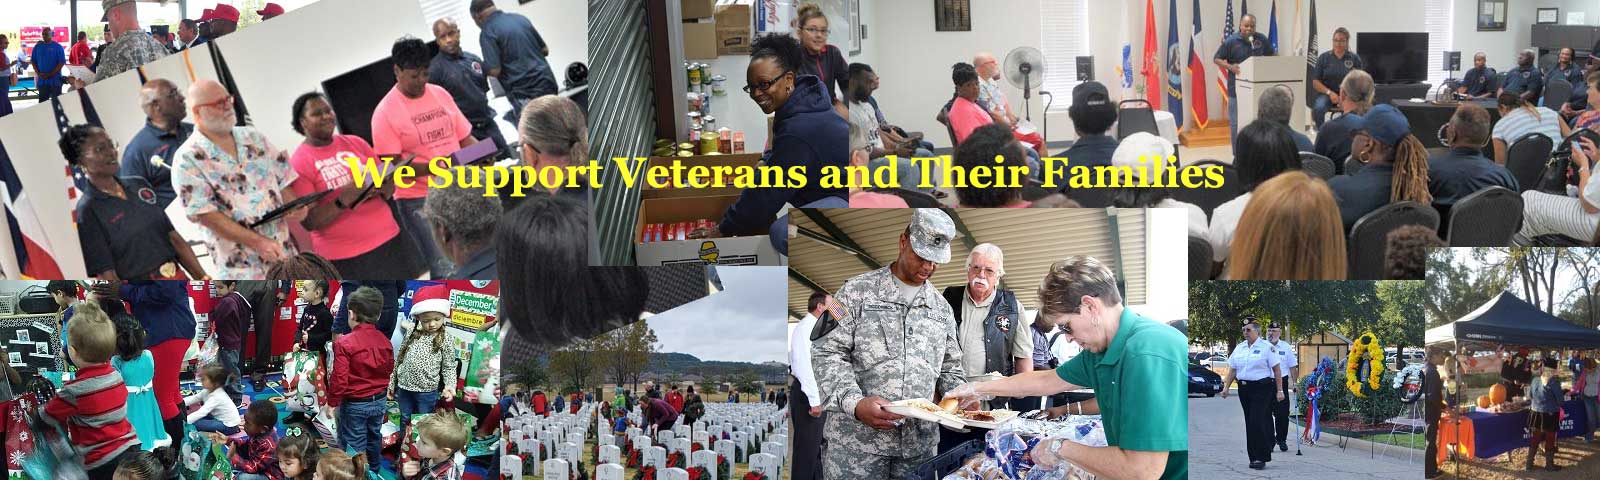 We Support Veterans and Their Families